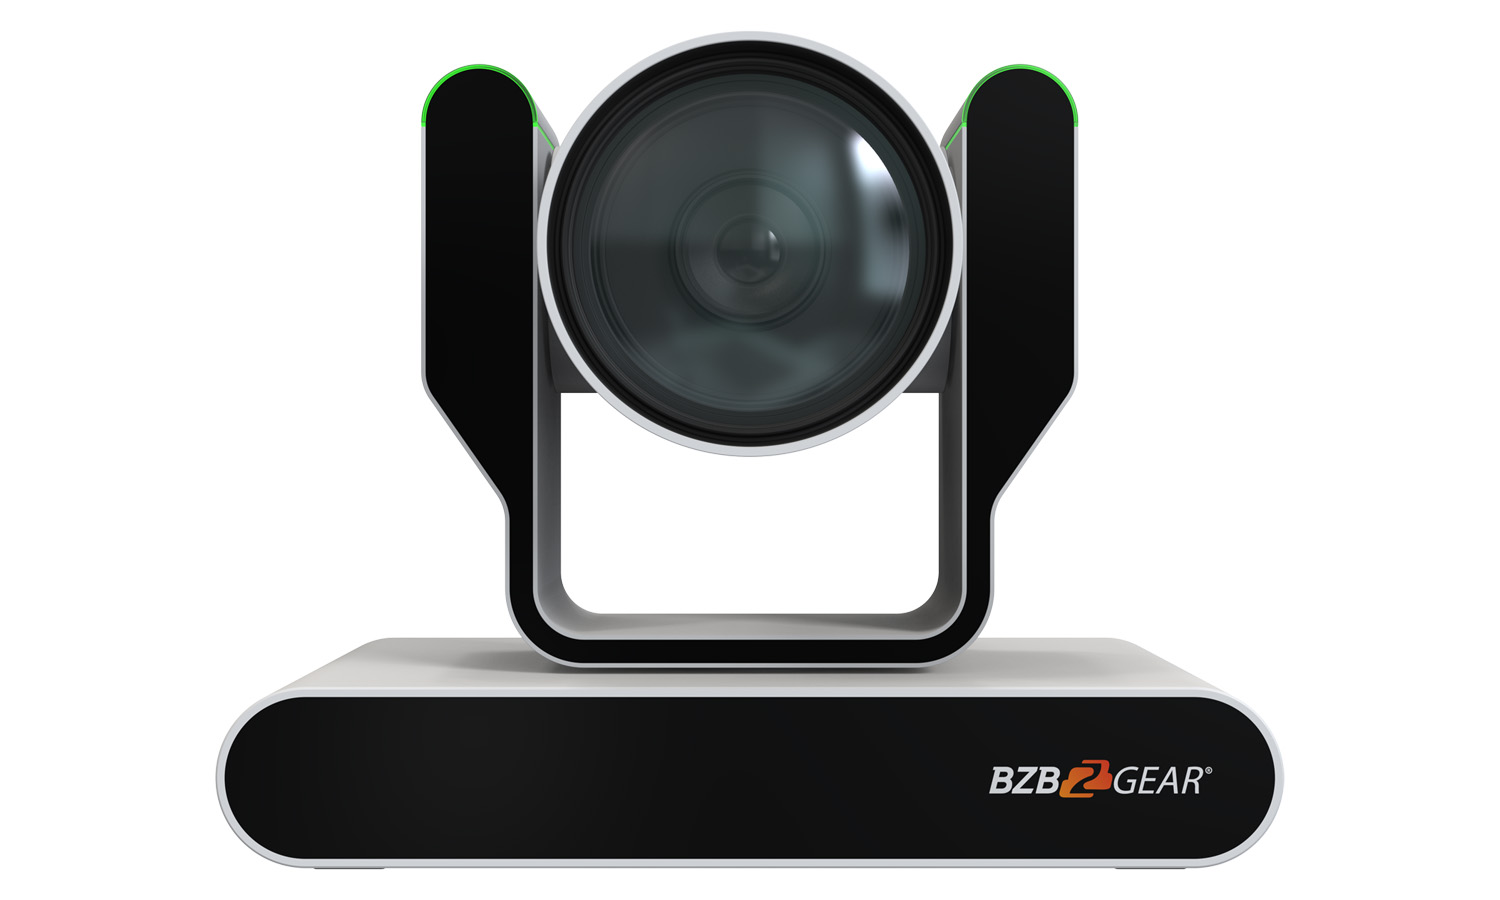 BG-ADAMO-4K12X-W 12X 4K@60Hz HDMI2.0/12G-SDI/USB 2.0/USB 3.0 Live Streaming PTZ Camera with Tally Lights (White) by BZBGEAR